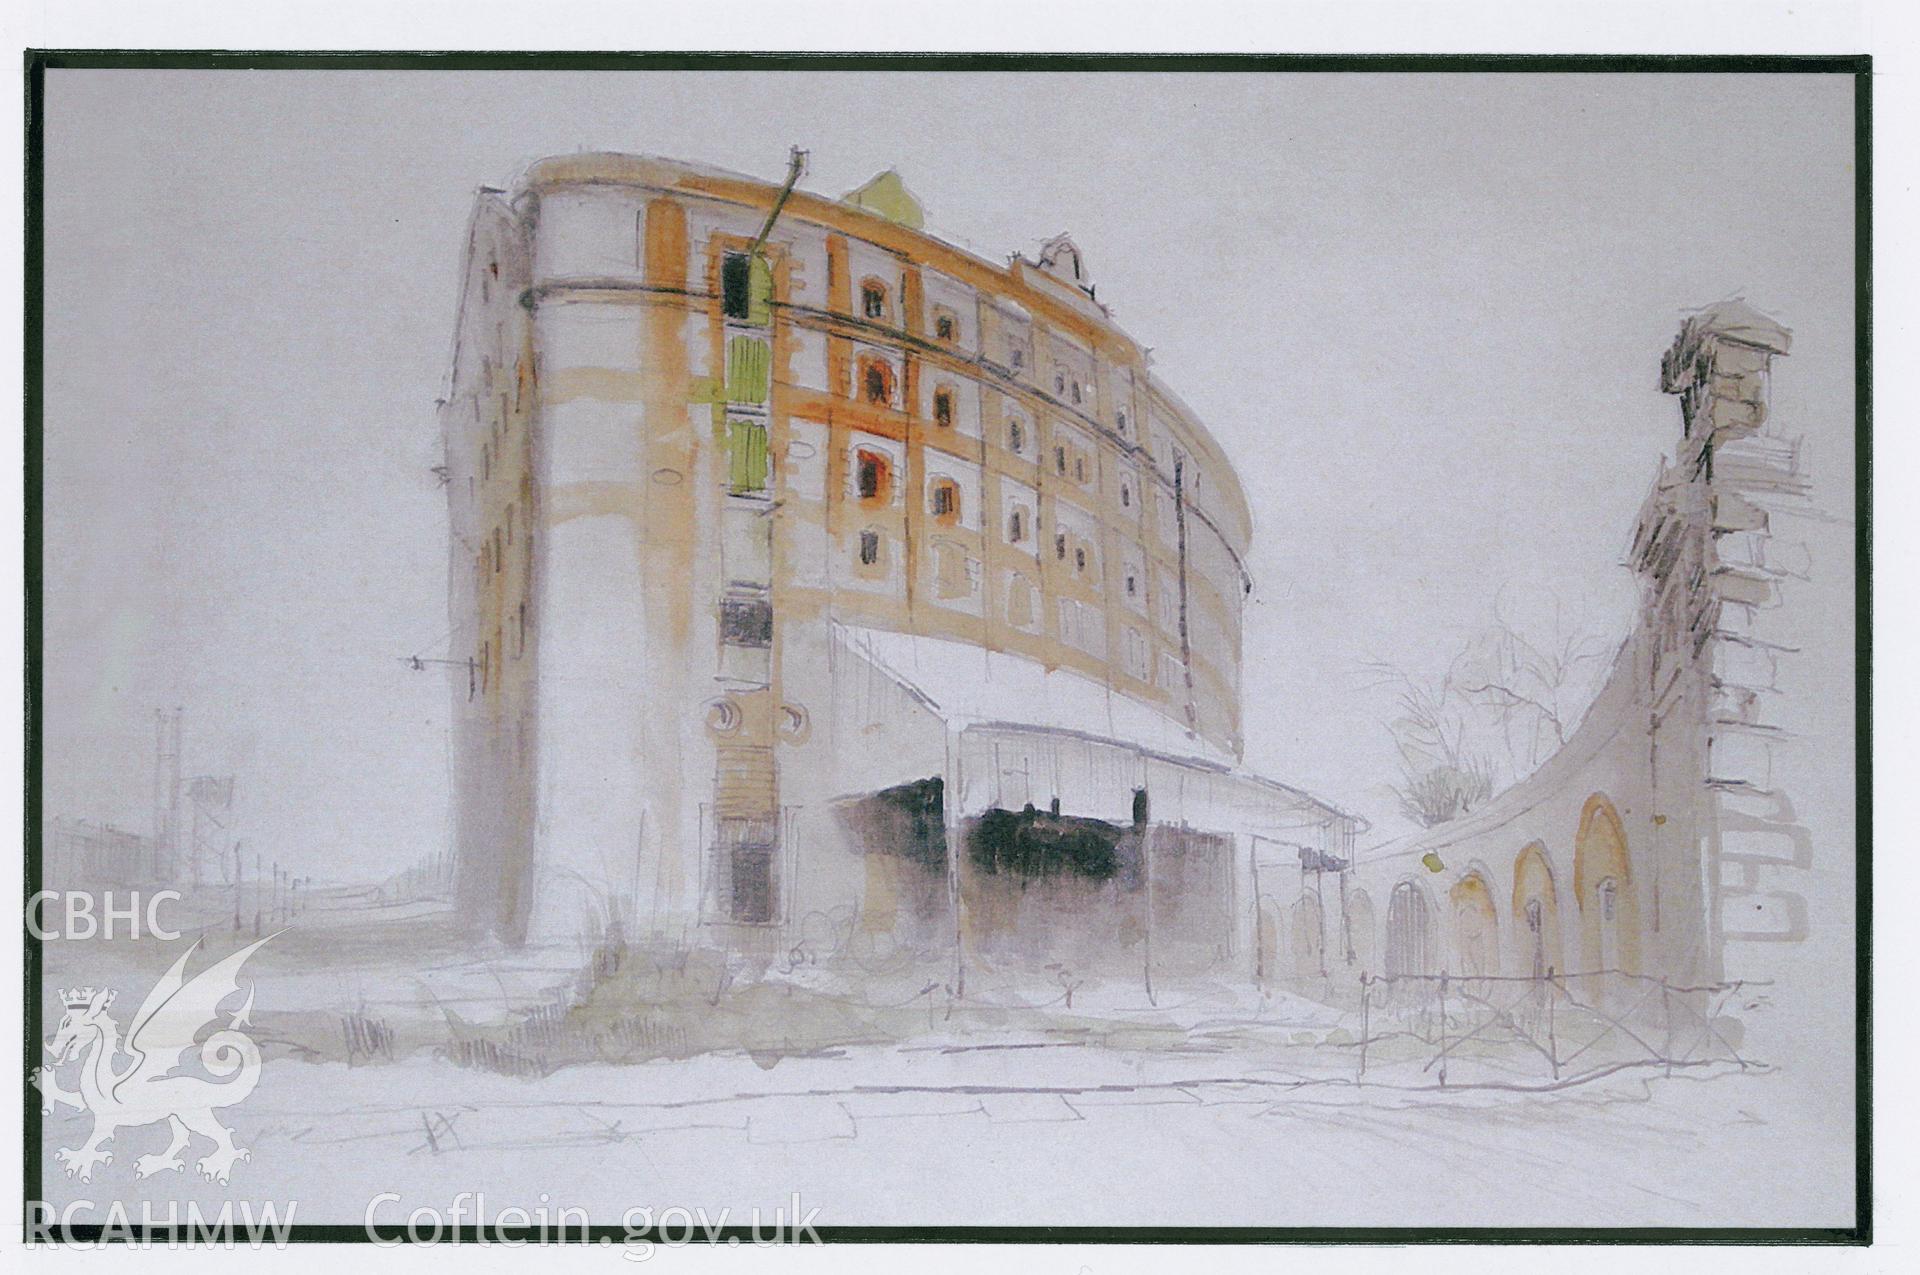 Spillers & Baker's curved warehouse: print of (pencil and watercolour) site sketch. Cardiff exhibition image, slide C20.